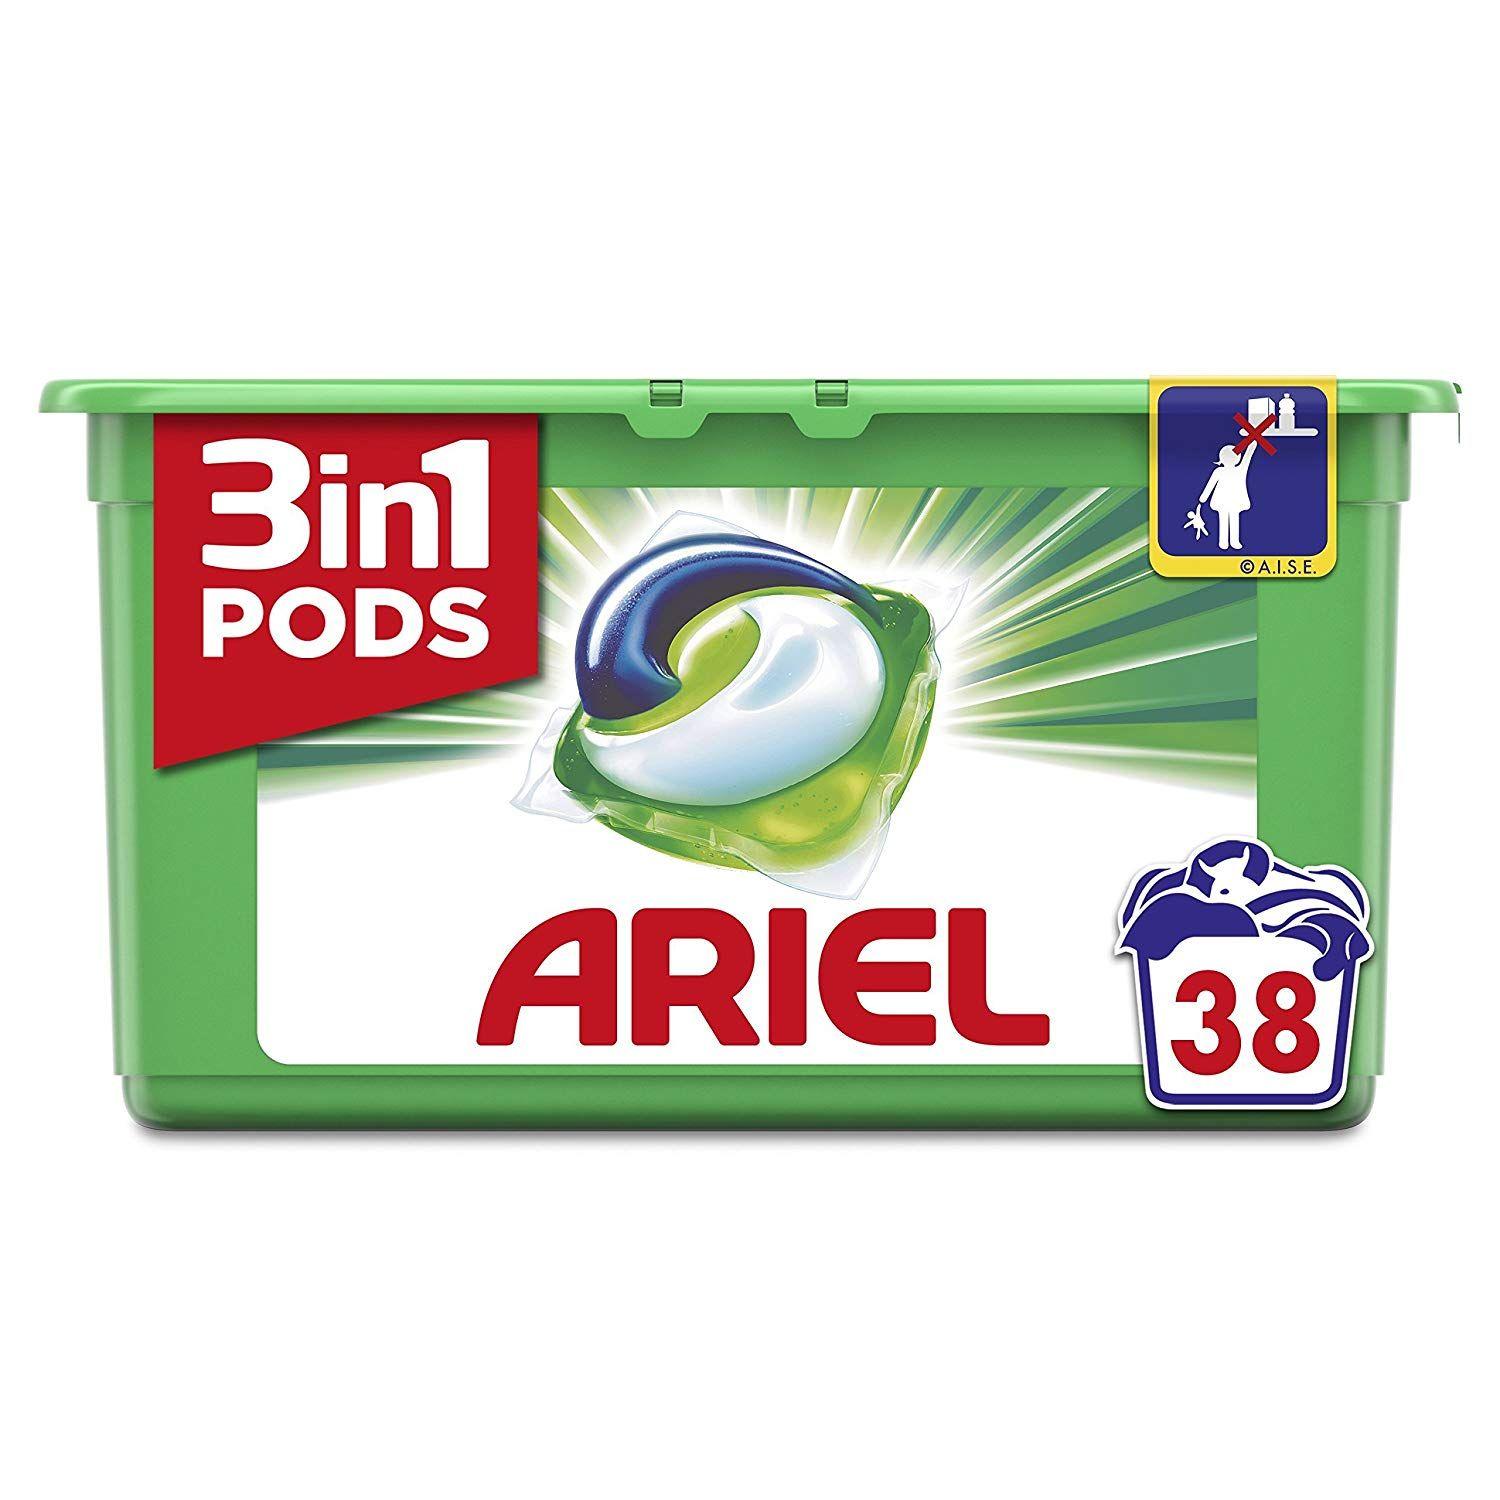 3 in 1 Logo - Ariel 3-in-1 Pods Regular Washing Tablets, 38 Washes: Amazon.co.uk ...